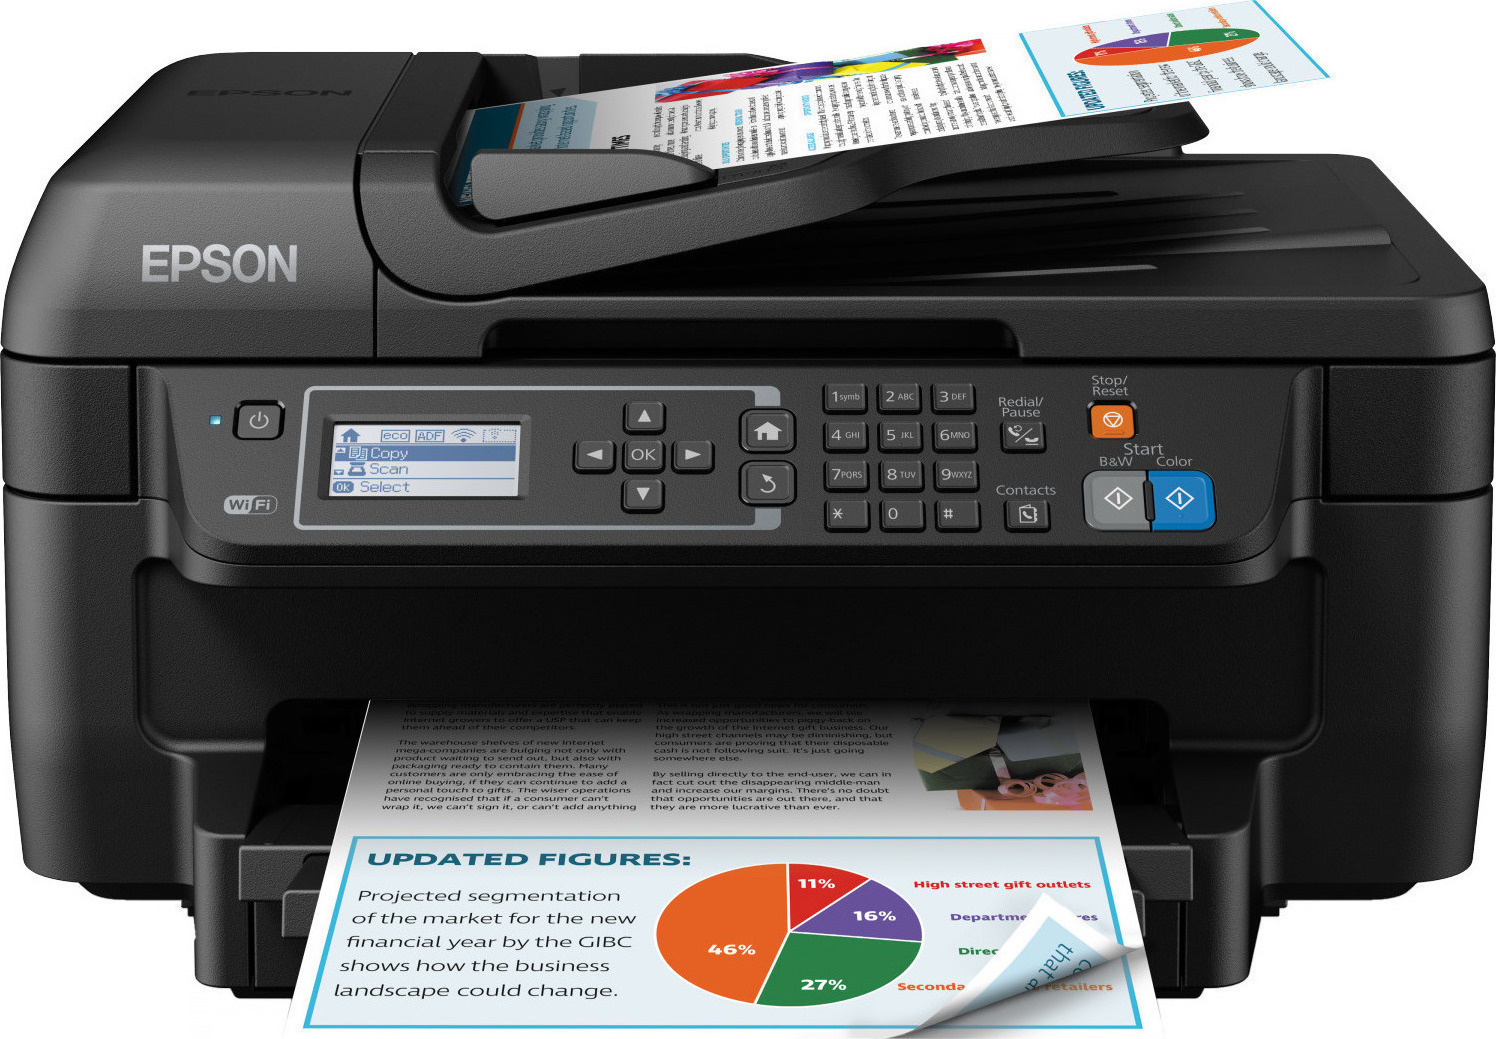 epson scan to cloud wf 2750